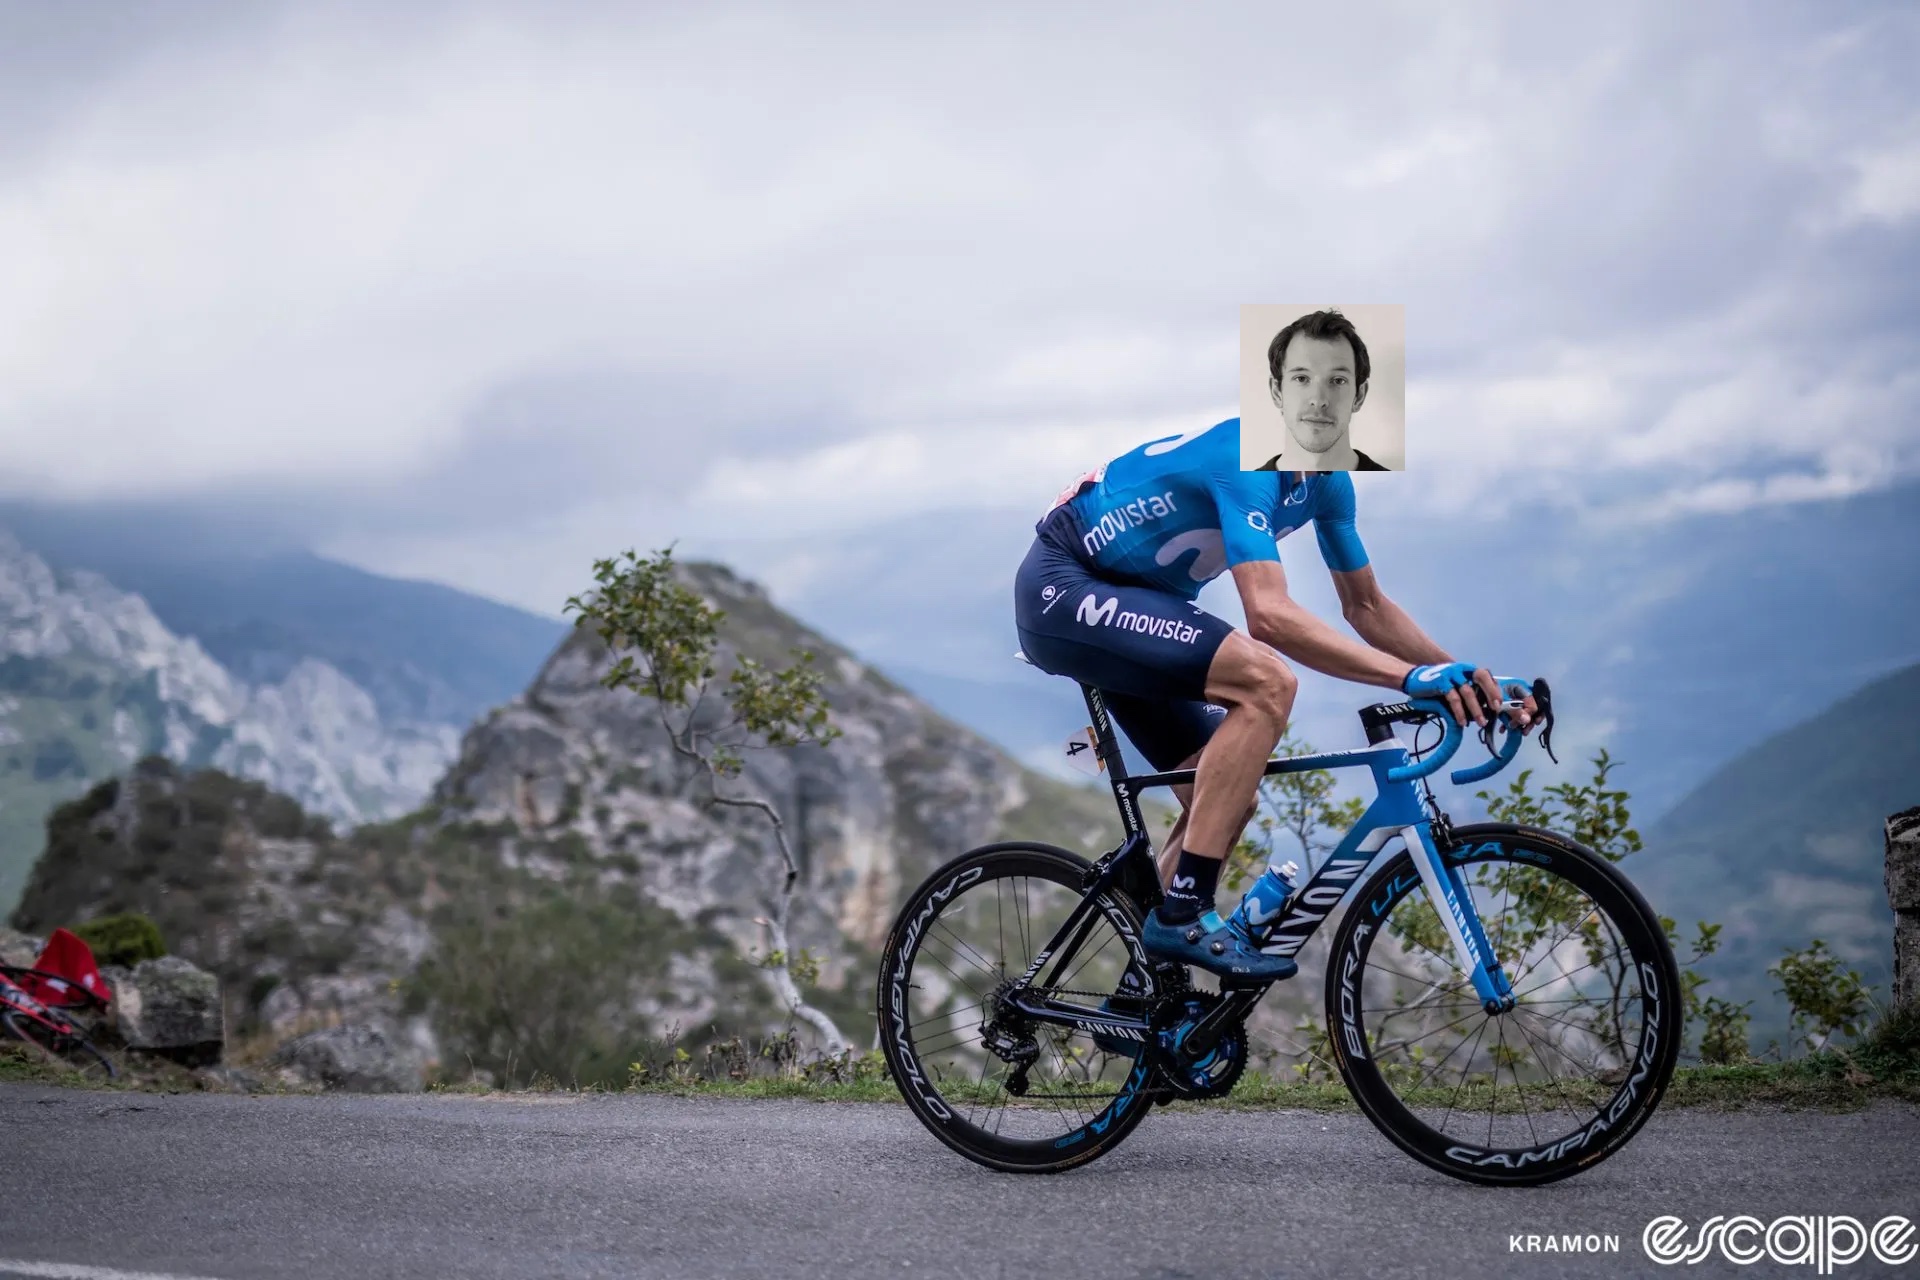 Imanol Erviti rides up a climb in the 2019 Vuelta a España. Andy McGrath's mug is pasted over Erviti's head in a janky Photoshop job.